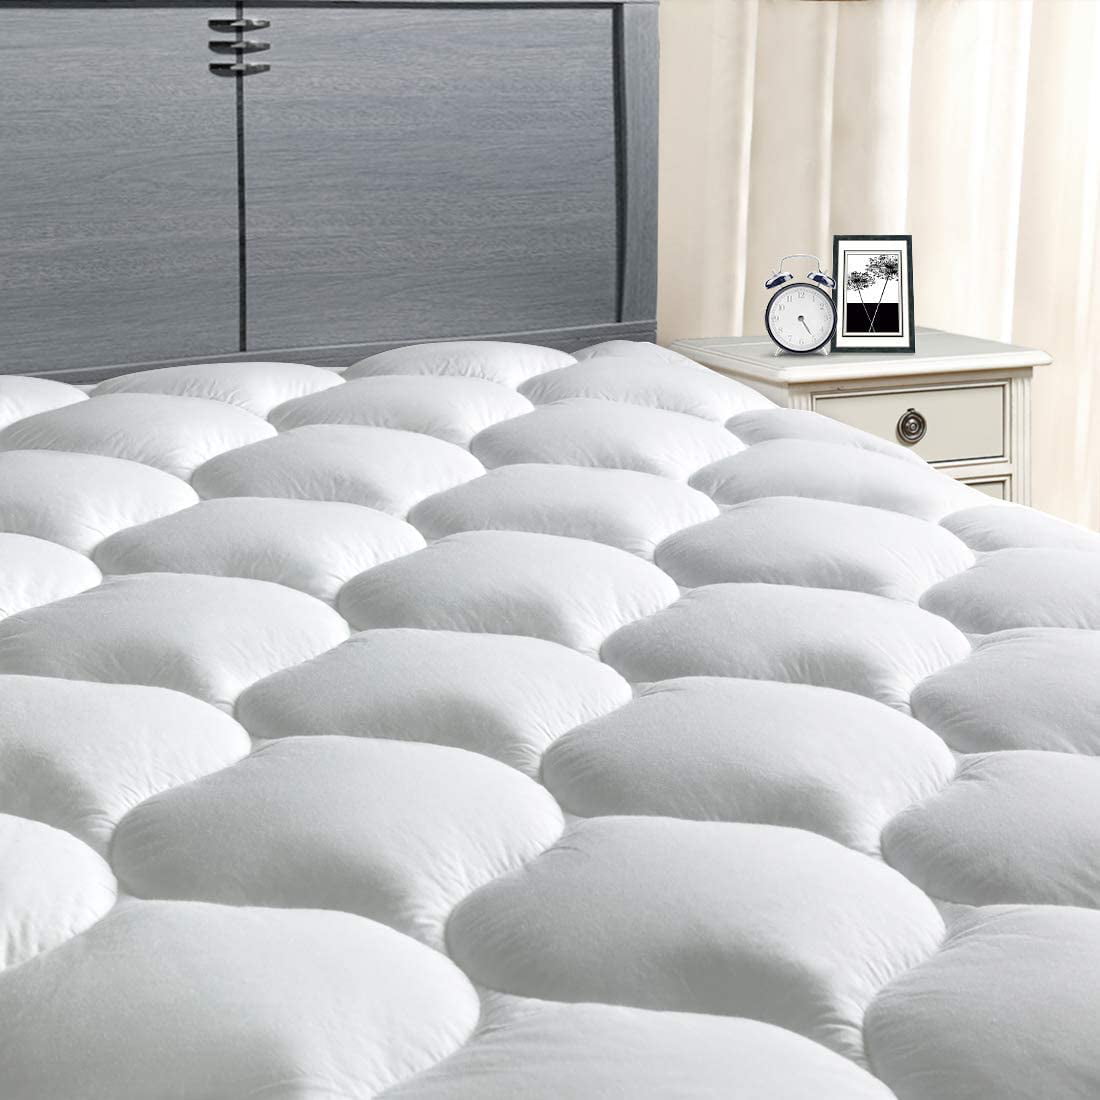 8-21/’/’Fitted Deep Pocket Queen Size OBOEY Queen Size Mattress Pad Cover Breathable Top Pillow Top with Snow Down Alternative Fill Cooling Mattress Topper Quilted